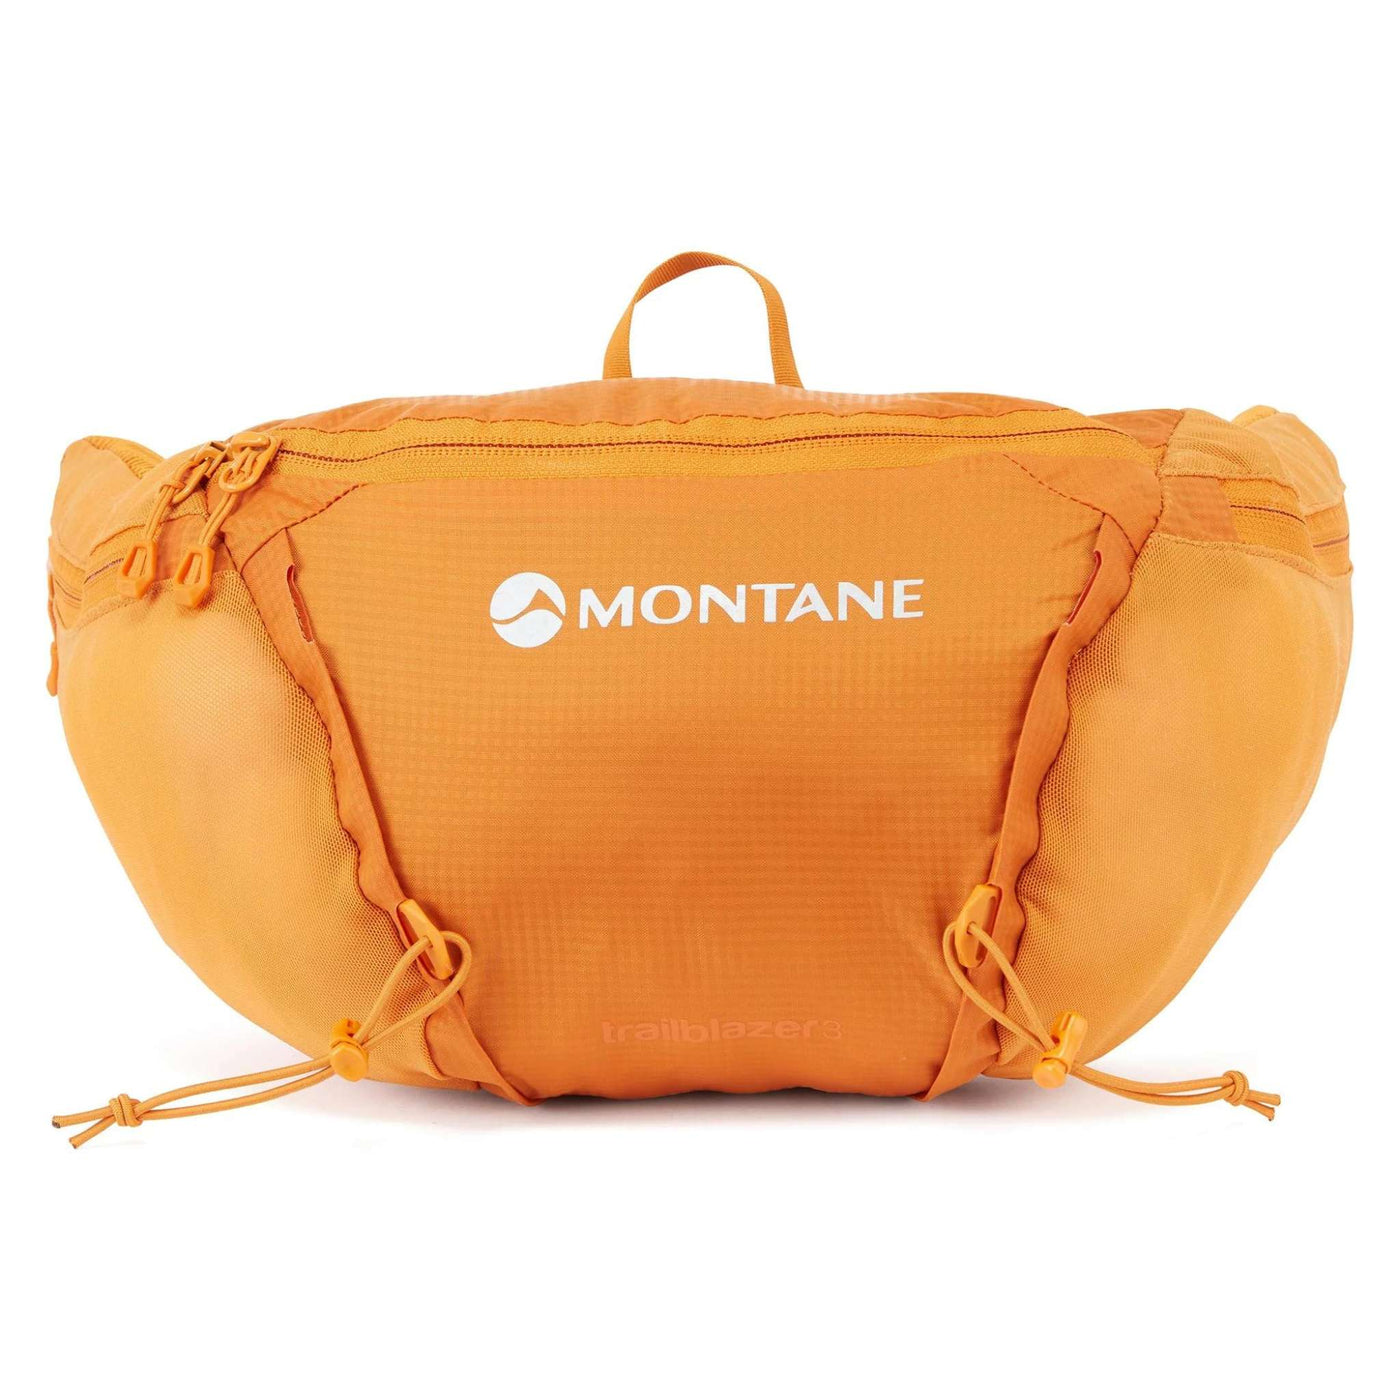 Montane Trailblazer 3 | Trail Running and Fast Packing Pack | Further Faster Christchurch NZ | #flame-orange